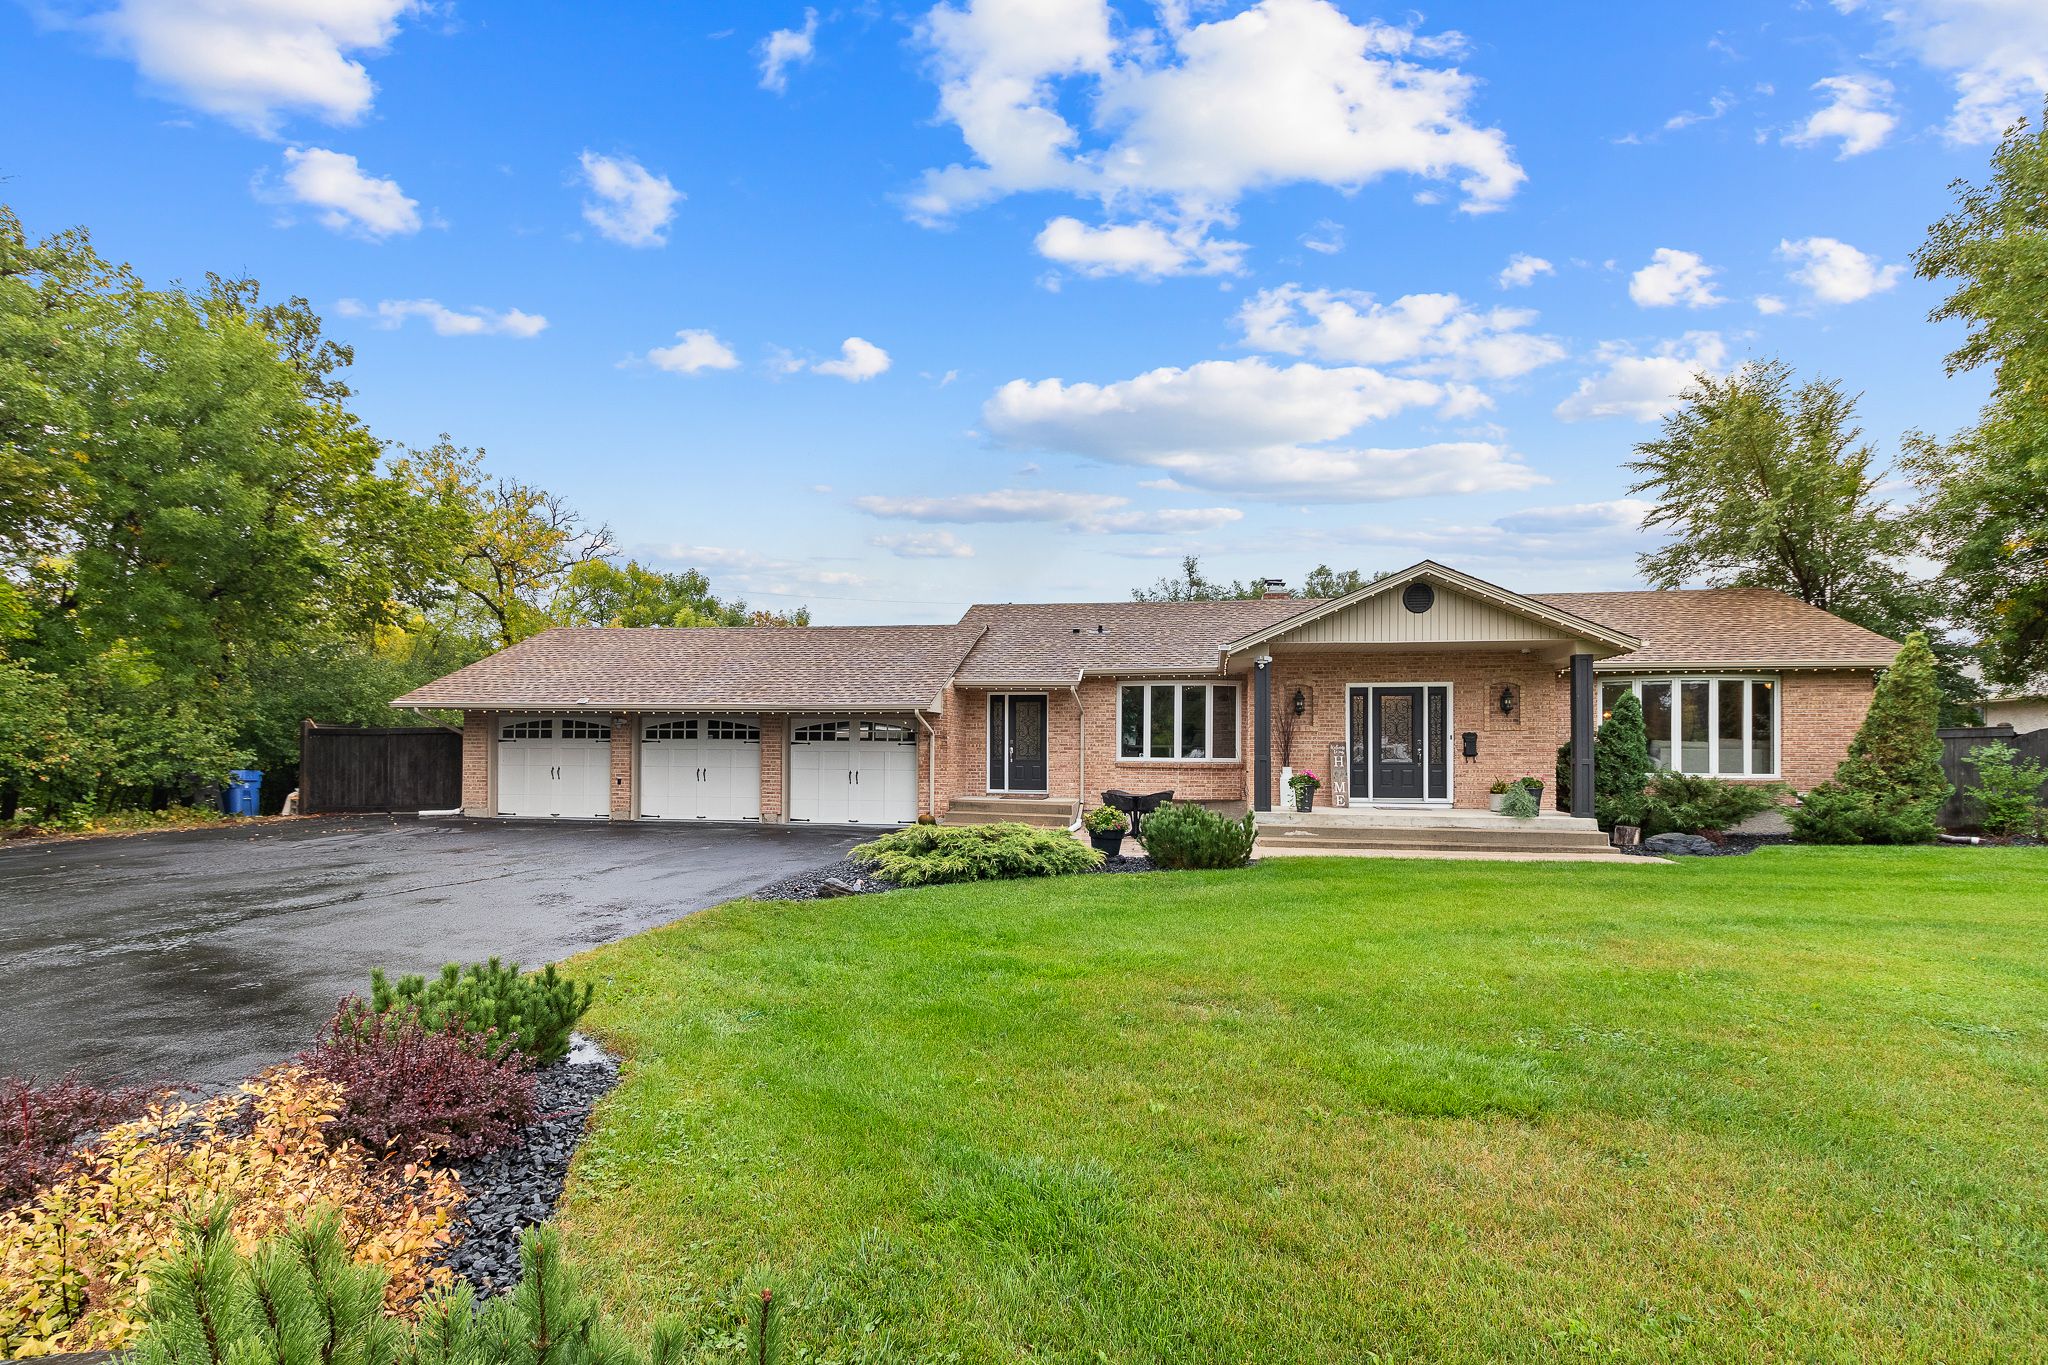 Open House. Open House on Sunday, April 30, 2023 12:00PM - 2:00PM
Amazing family home in East St.Paul with Pool!
5 Beds, 3.5 Baths, Finbasement. Landscaped backyard feat a heated inground pool, 2 pergolas, large patio &amp; automated in-ground lighting &a